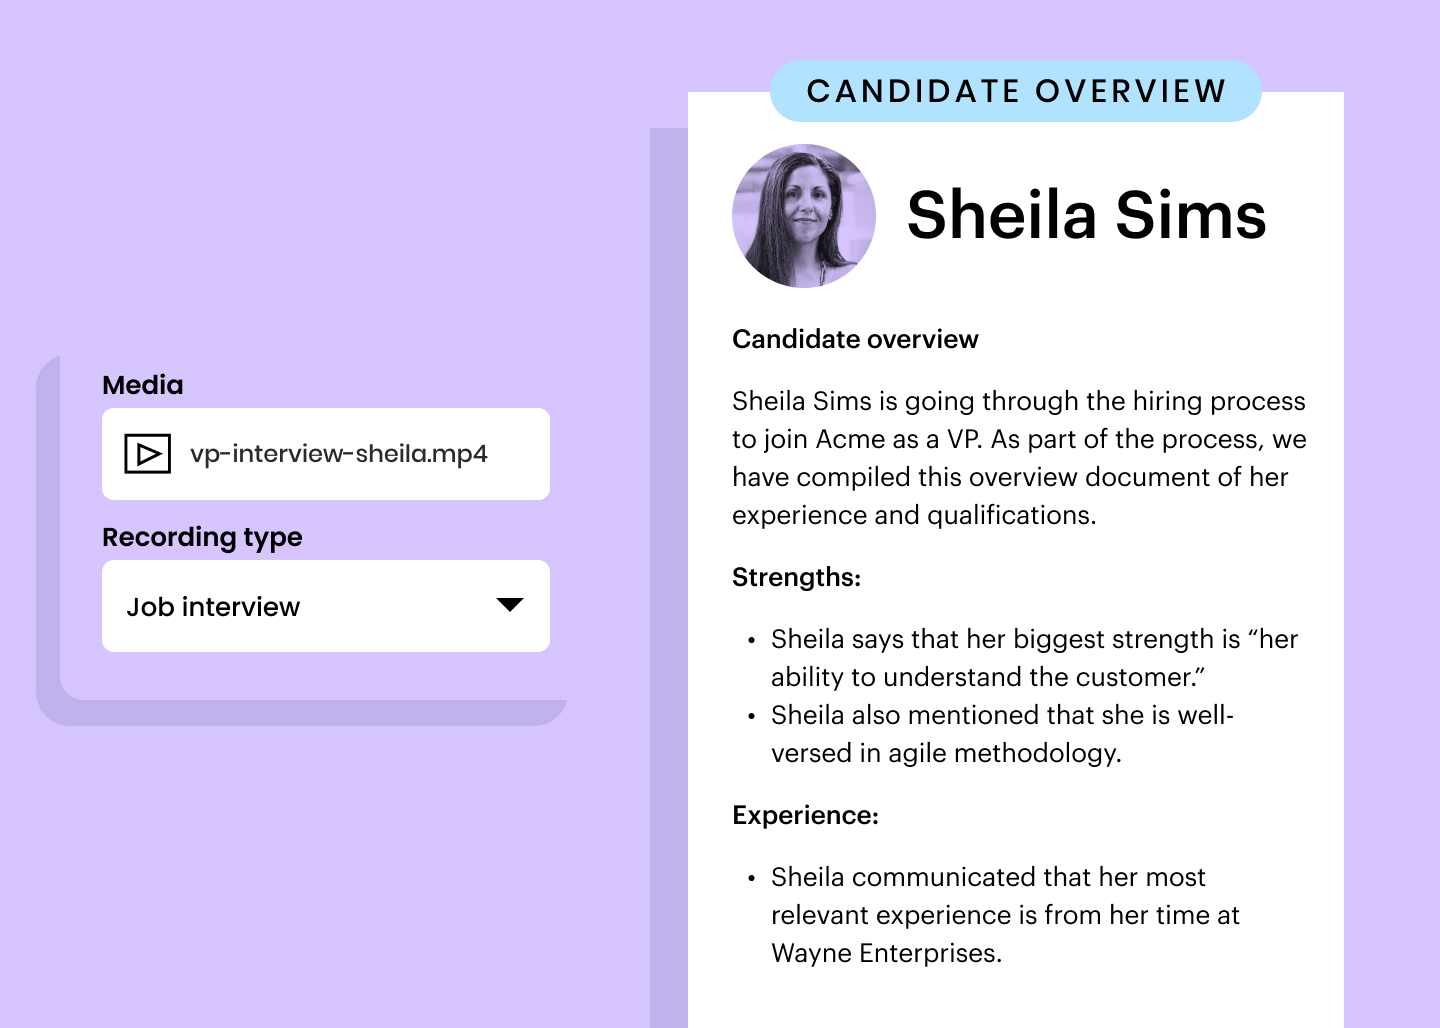 Candidate overview example: Sheila Sims is going through the hiring process to join Acme as a VP. As part of the process, we have compiled this overview document of her experience and qualifications. Strengths: Sheila says that her biggest strength is “her ability to understand the customer.” Sheila also mentioned that she is well-versed in agile methodology. Experience: Sheila communicated that her most relevant experience is from her time at Wayne Enterprises.